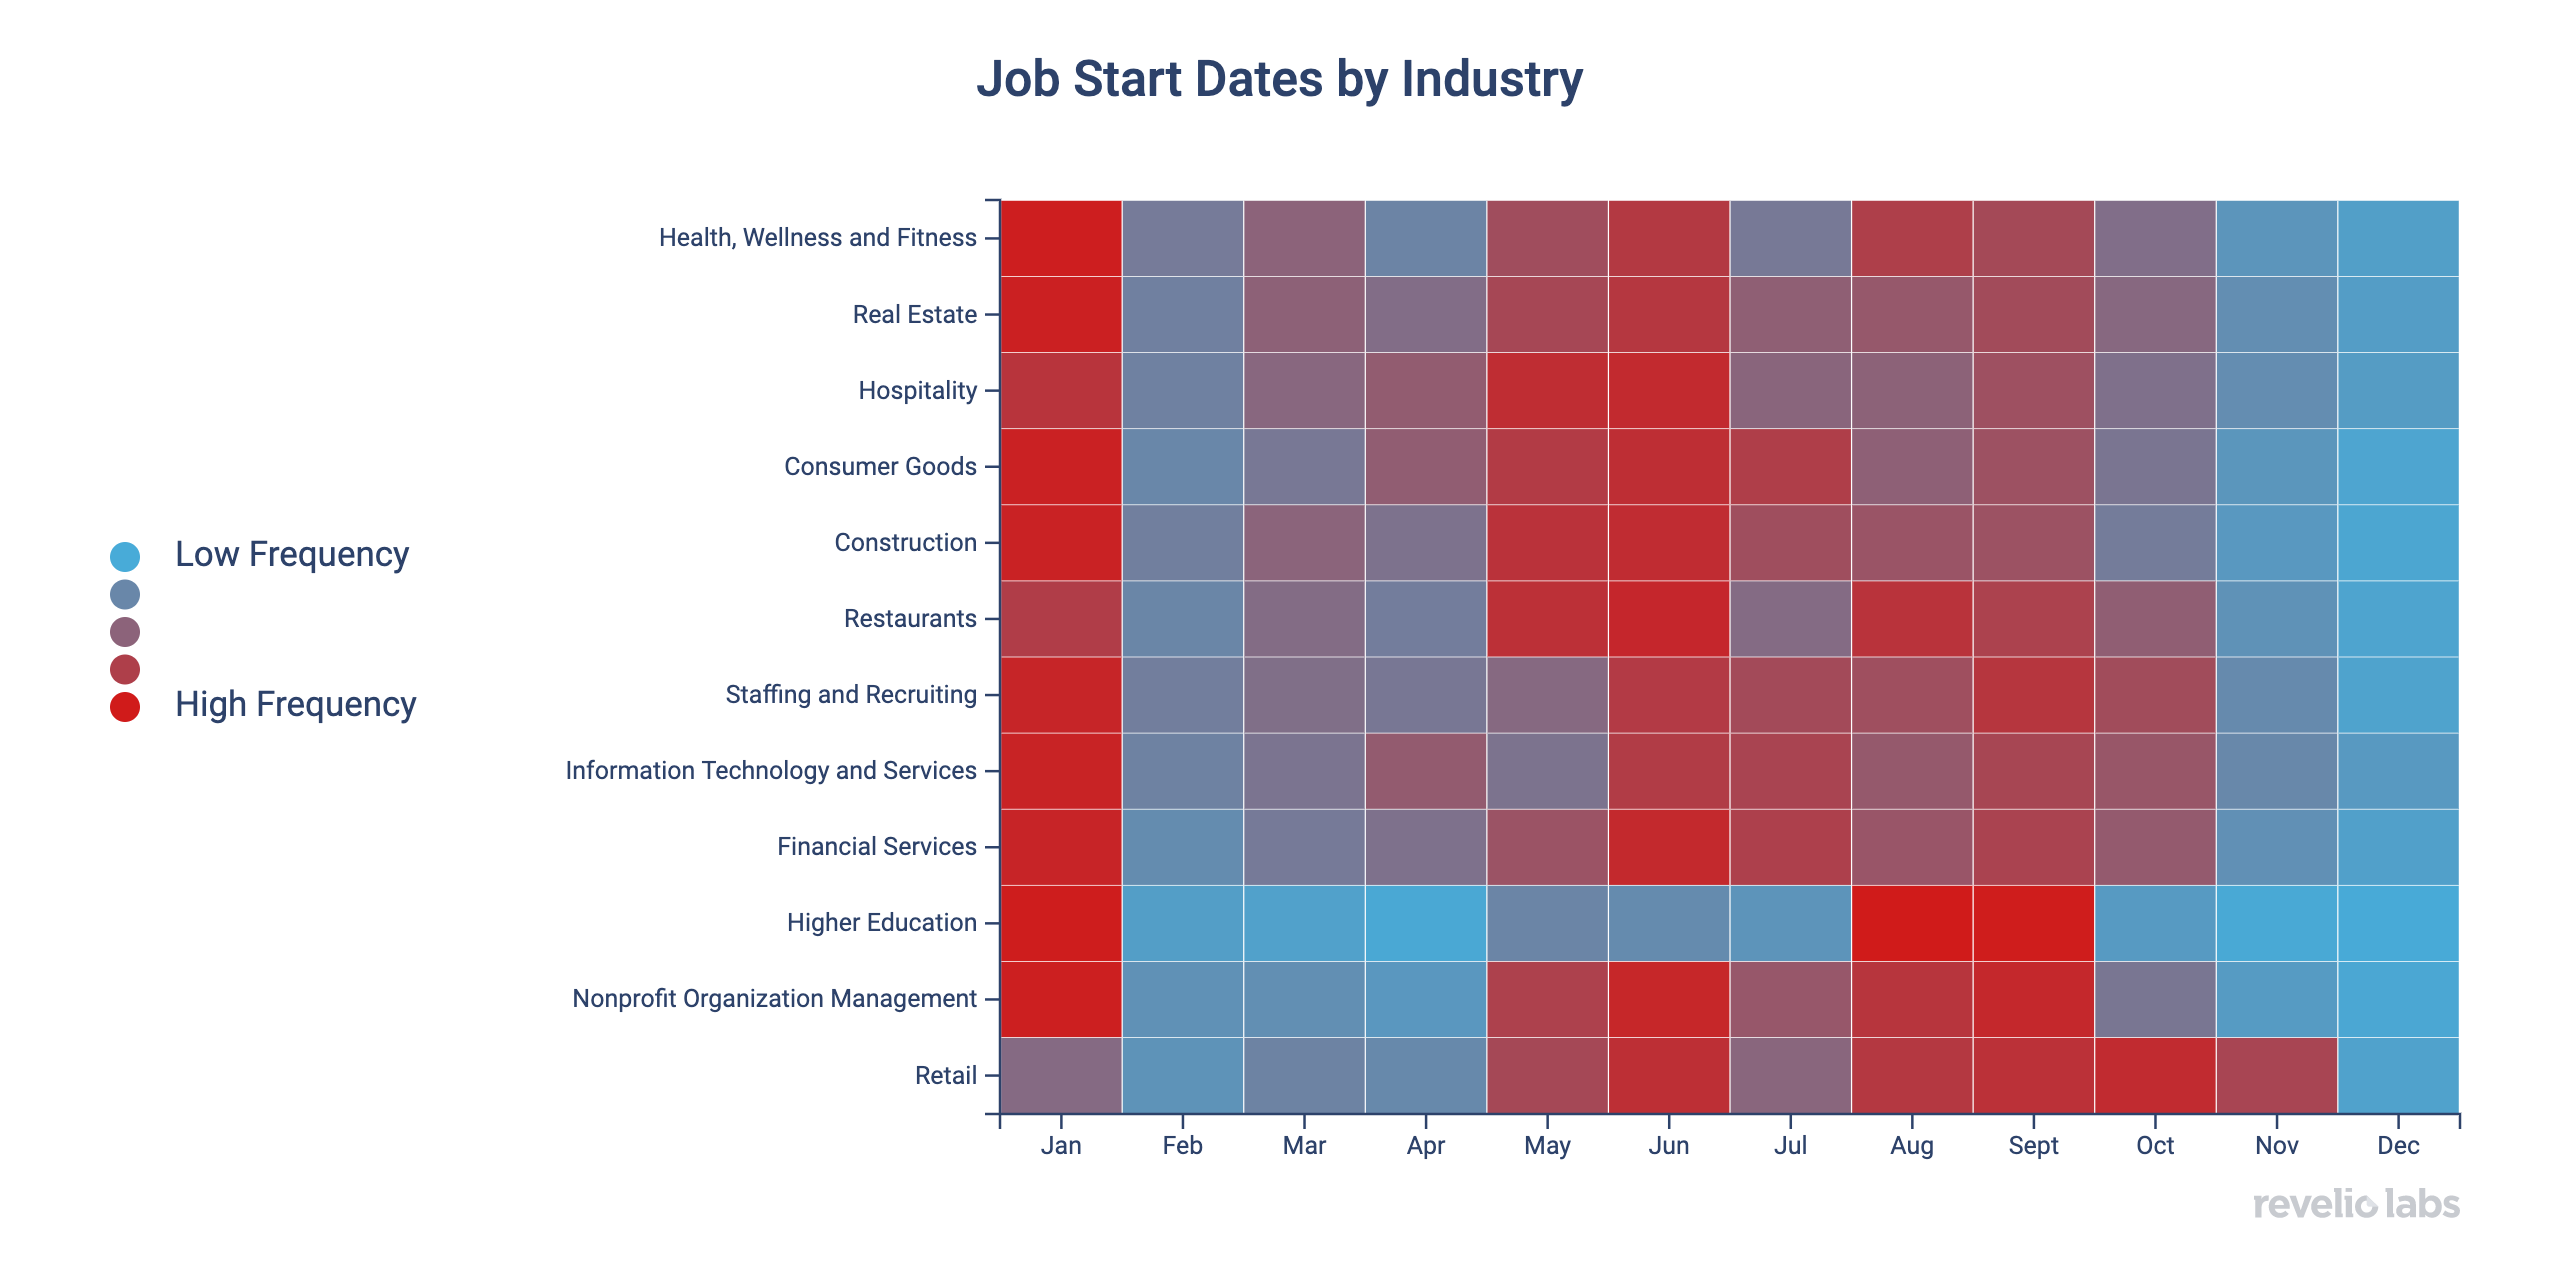 Job Start Dates by Industry